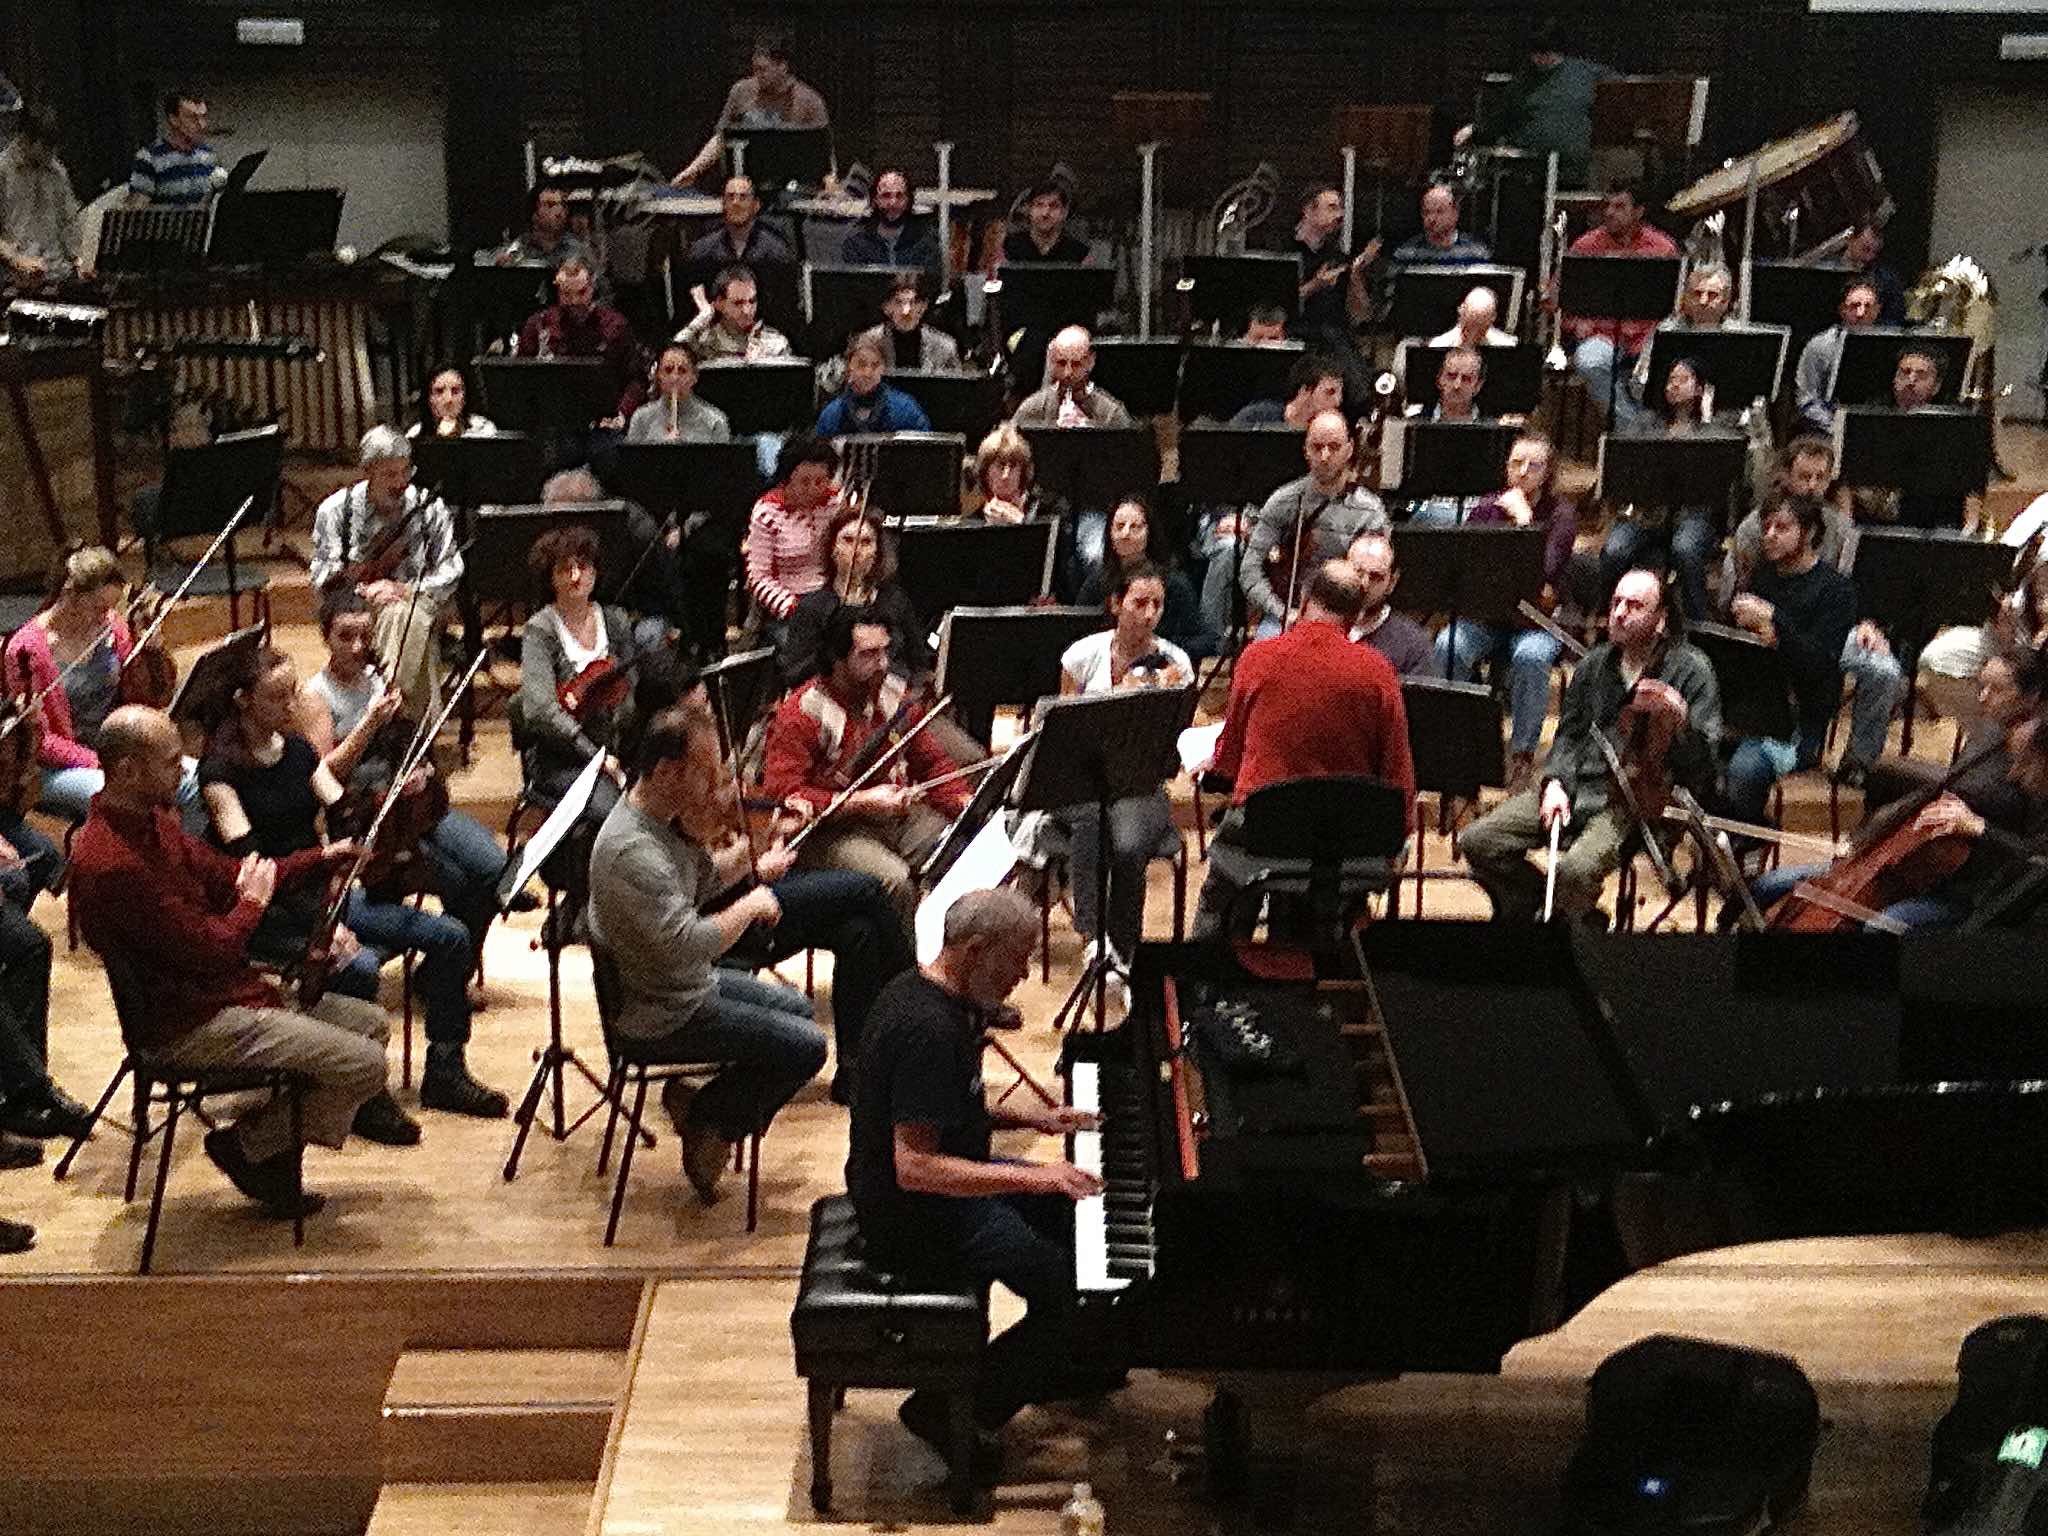 Rehearsal with Maestro Gunzenhauser  Corky and Orchestra